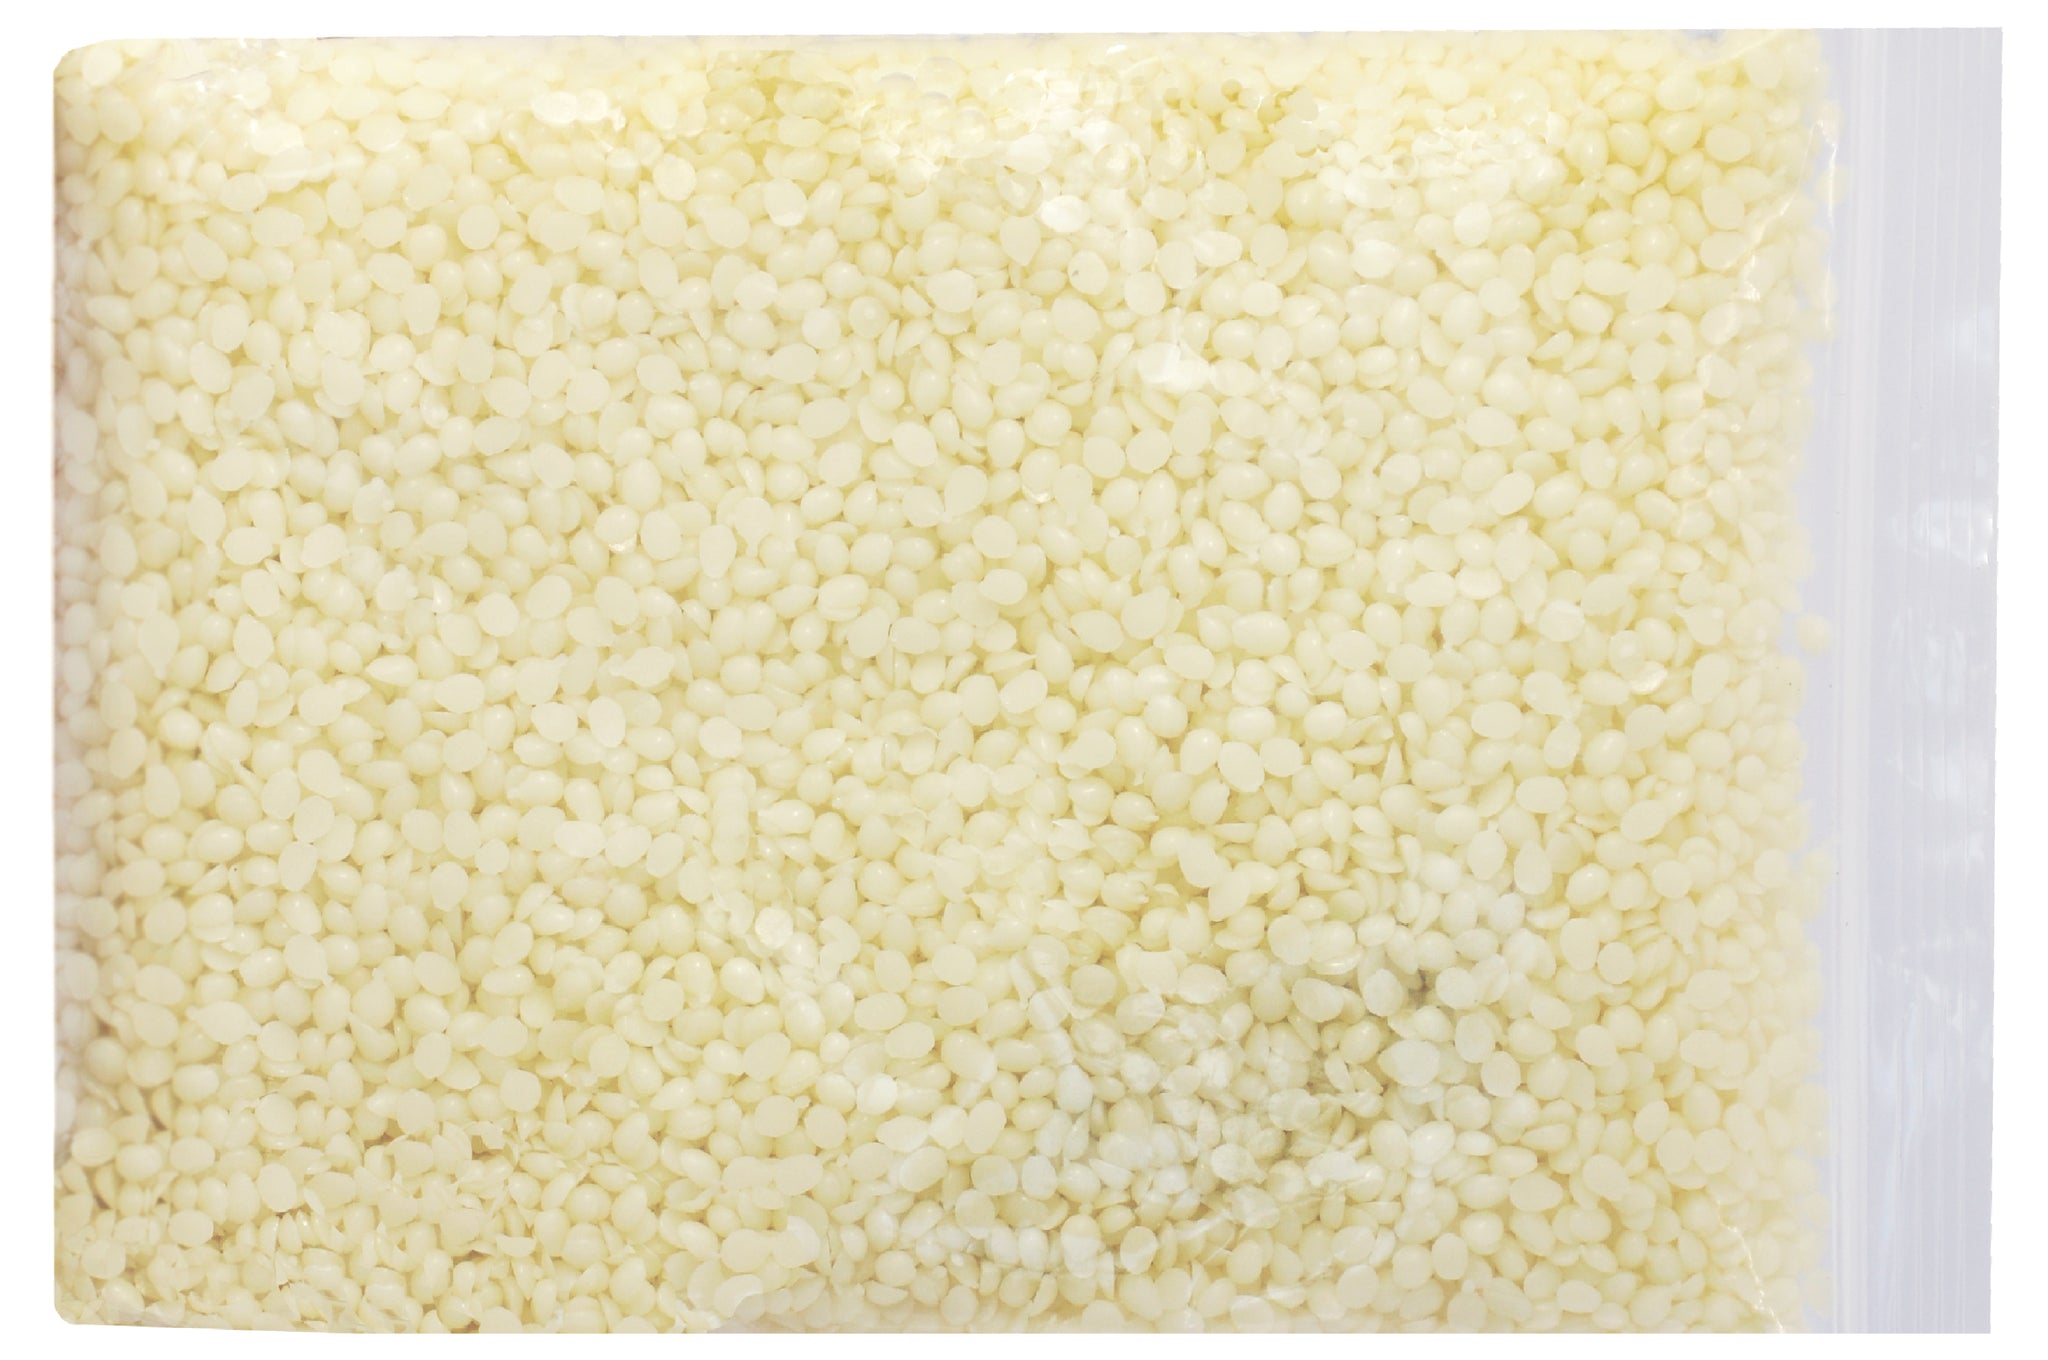  Beeswax Pellets, BOYUJK White Beeswax for Candle